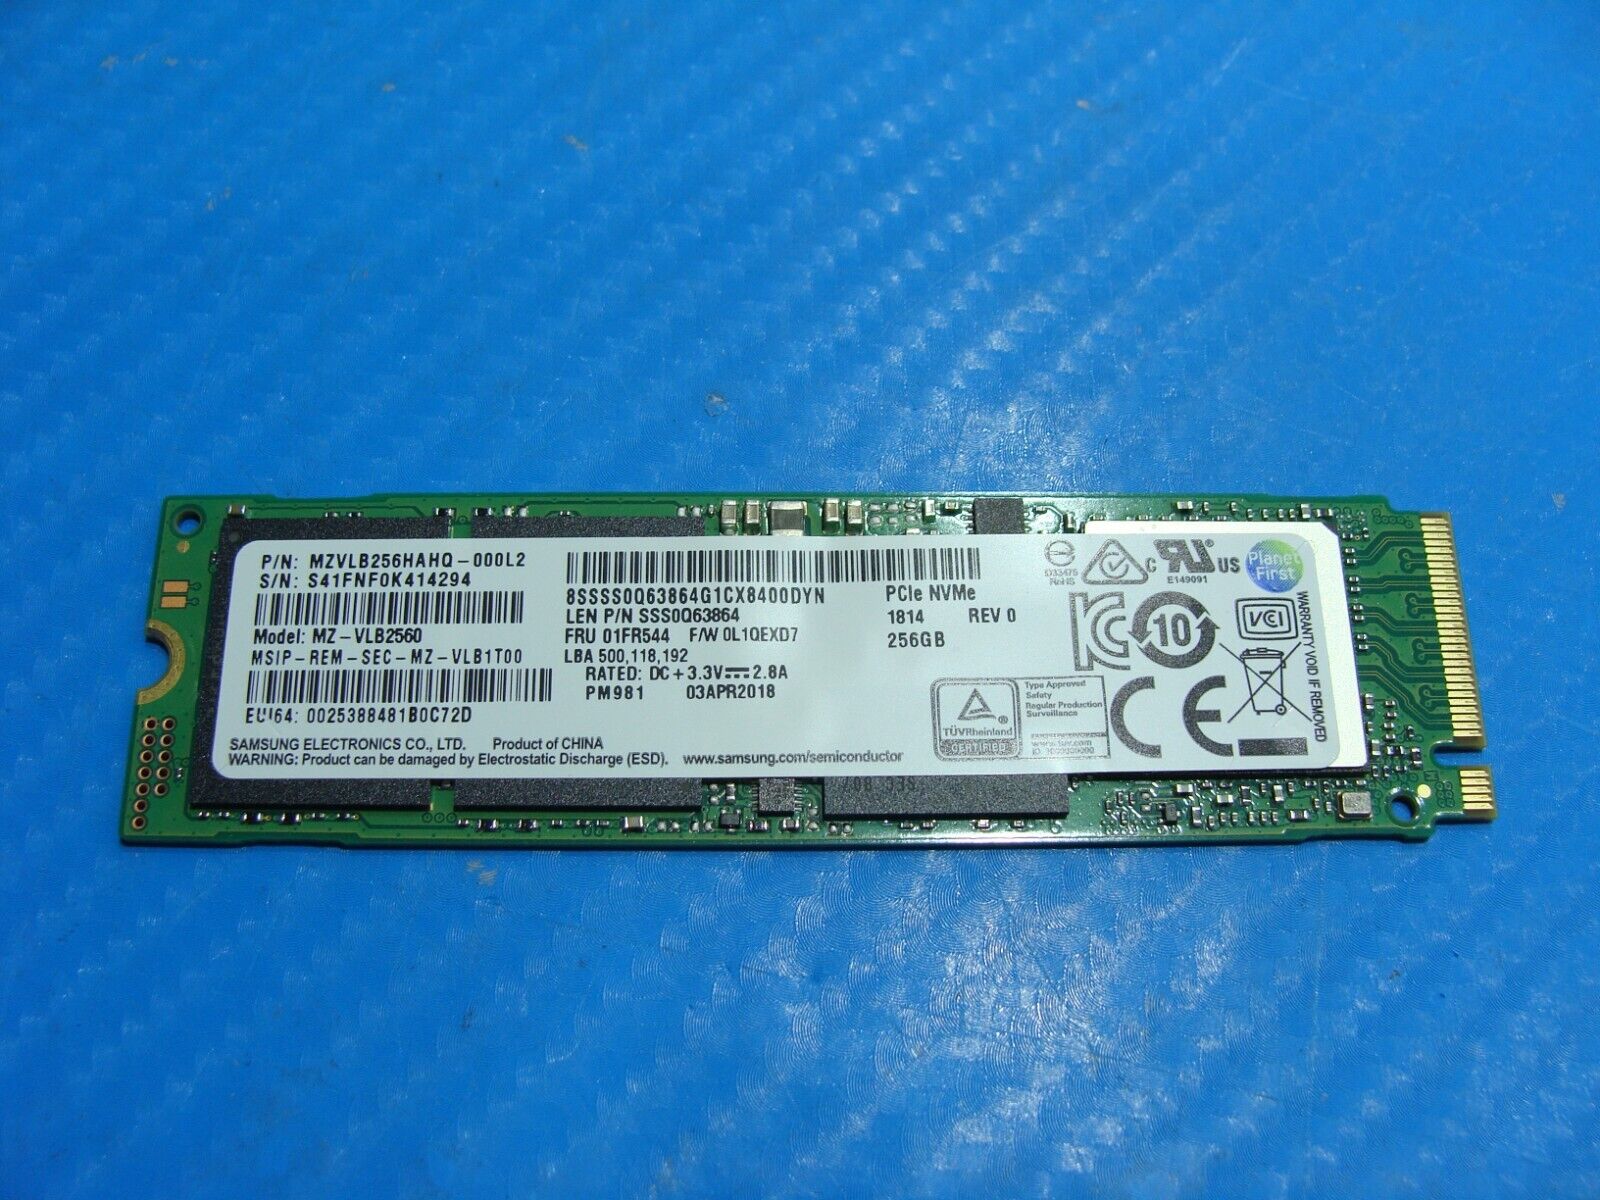 Lenovo 5-1570 Samsung 256GB NVMe M.2 SSD Solid State Drive MZVLB256HAHQ-000L2